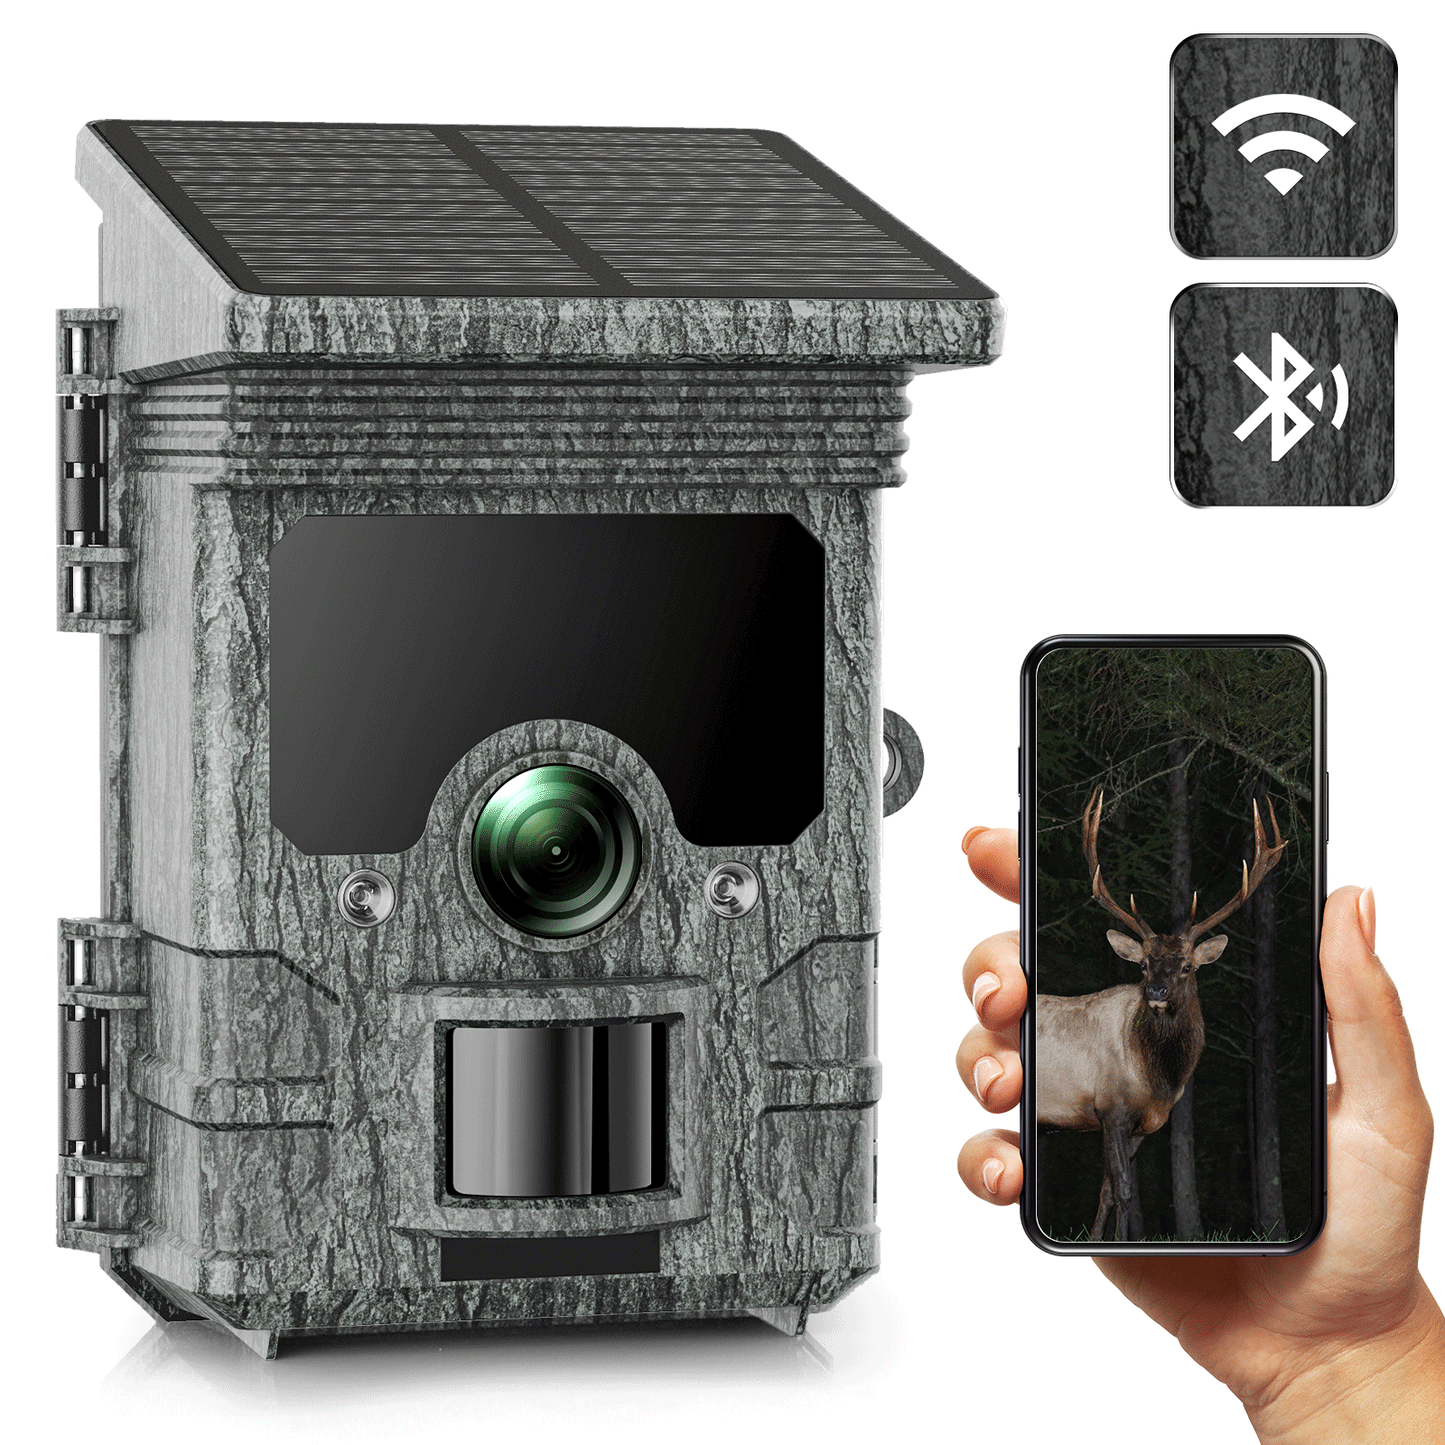 CAMPARK Solar Powered Trail Camera Native 4K 30fps 46MP WiFi Game Deer Camera 4400mAh Bluetooth Hunting Camera with Infrared Night Vision Motion Activated Waterproof Trail Cam for Wildlife Monitoring